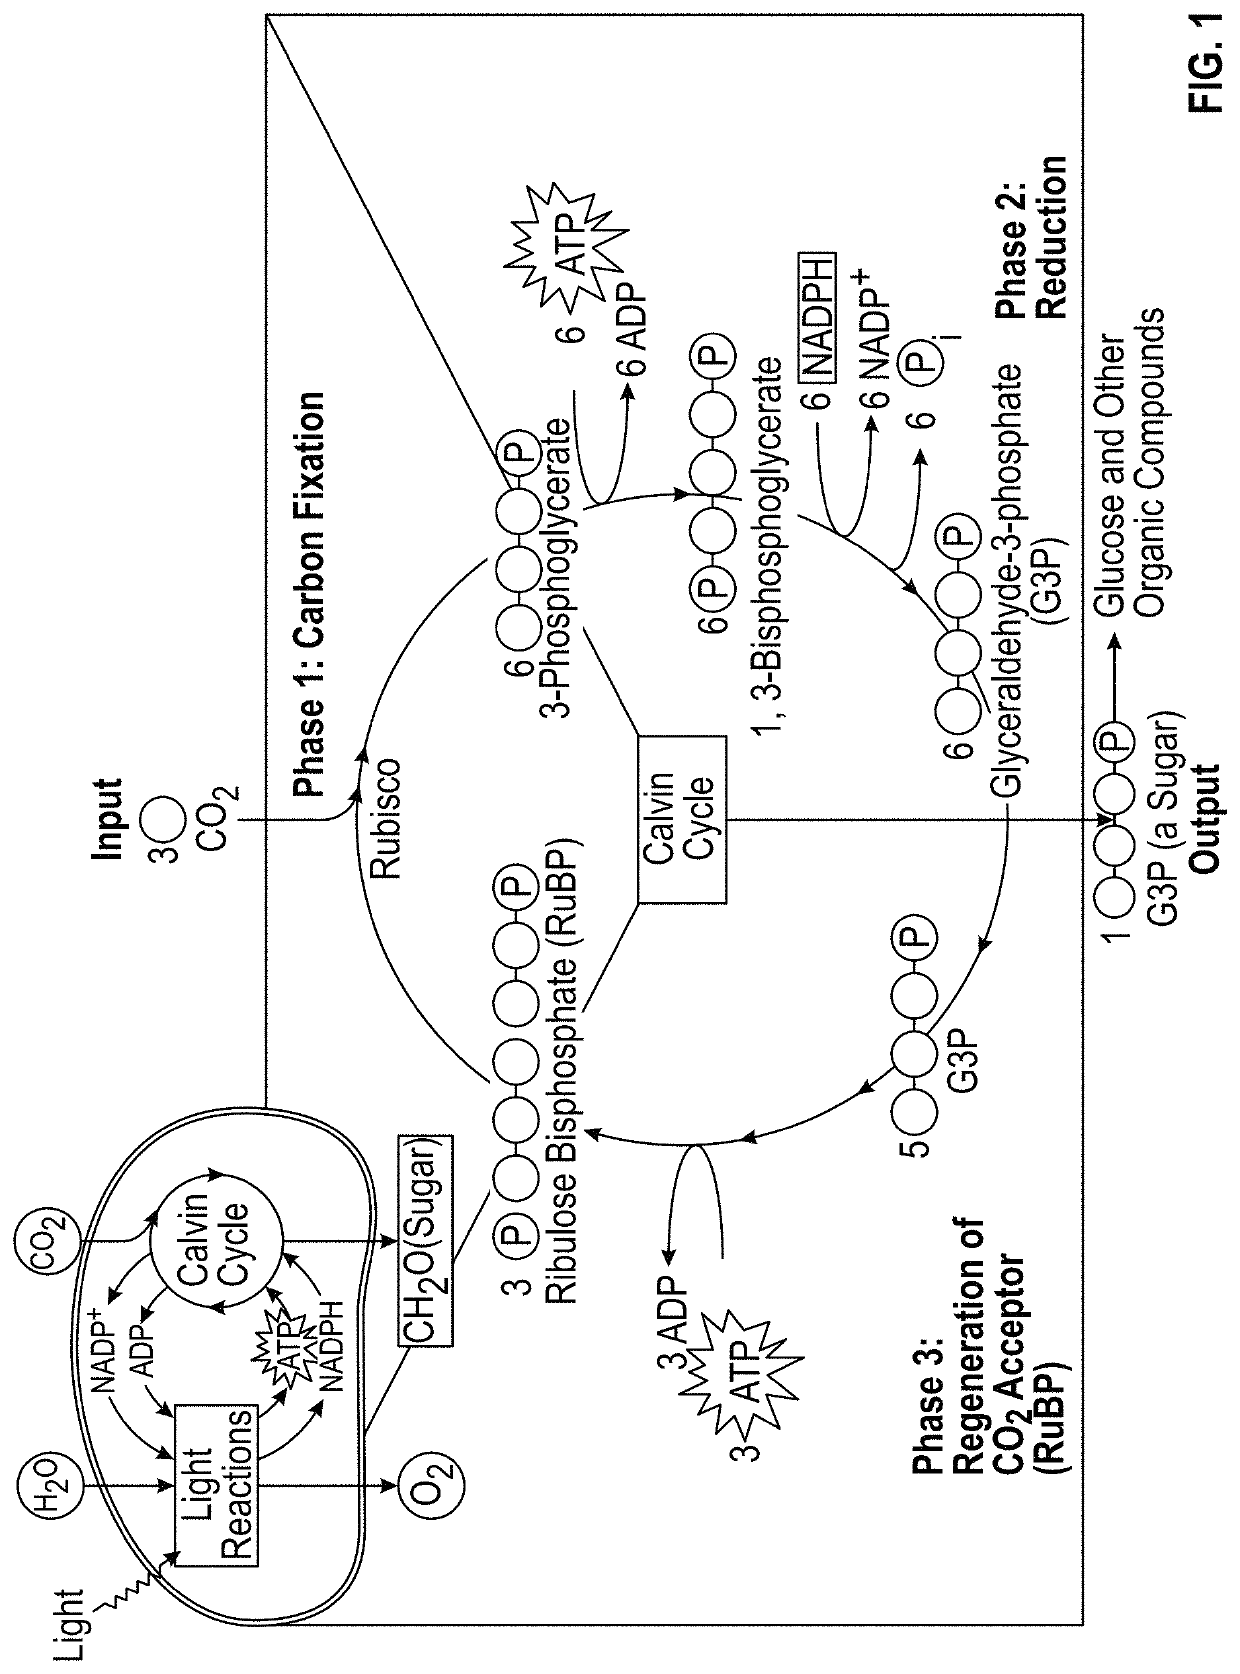 Transgenic plants with engineered redox sensitive modulation of photosynthetic antenna complex pigments and methods for making the same